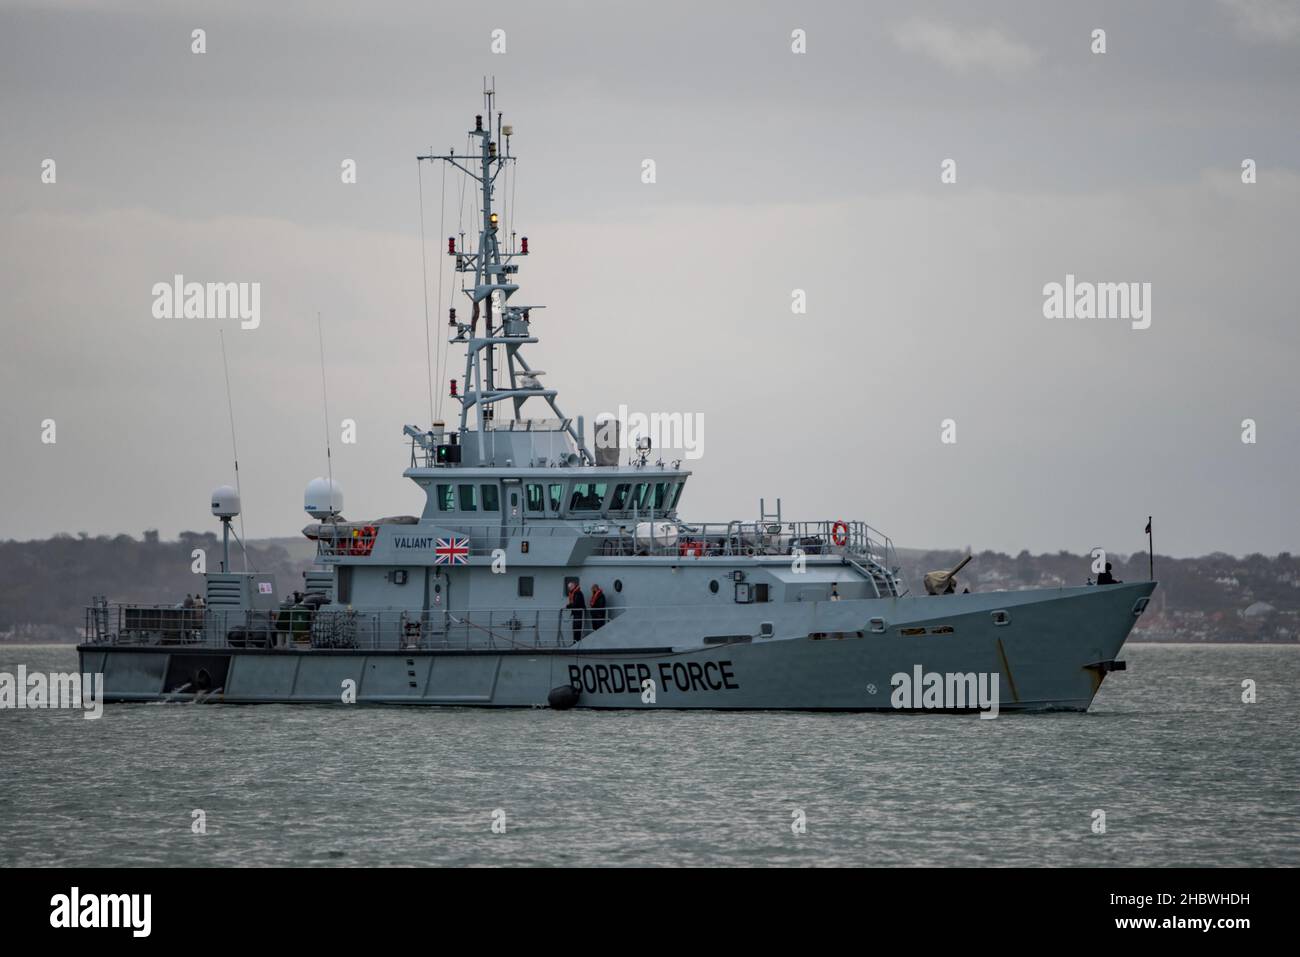 The UK Border Force cutter HMC Valiant inbound to Portsmouth Harbour, UK on the 9th December 2021. Stock Photo